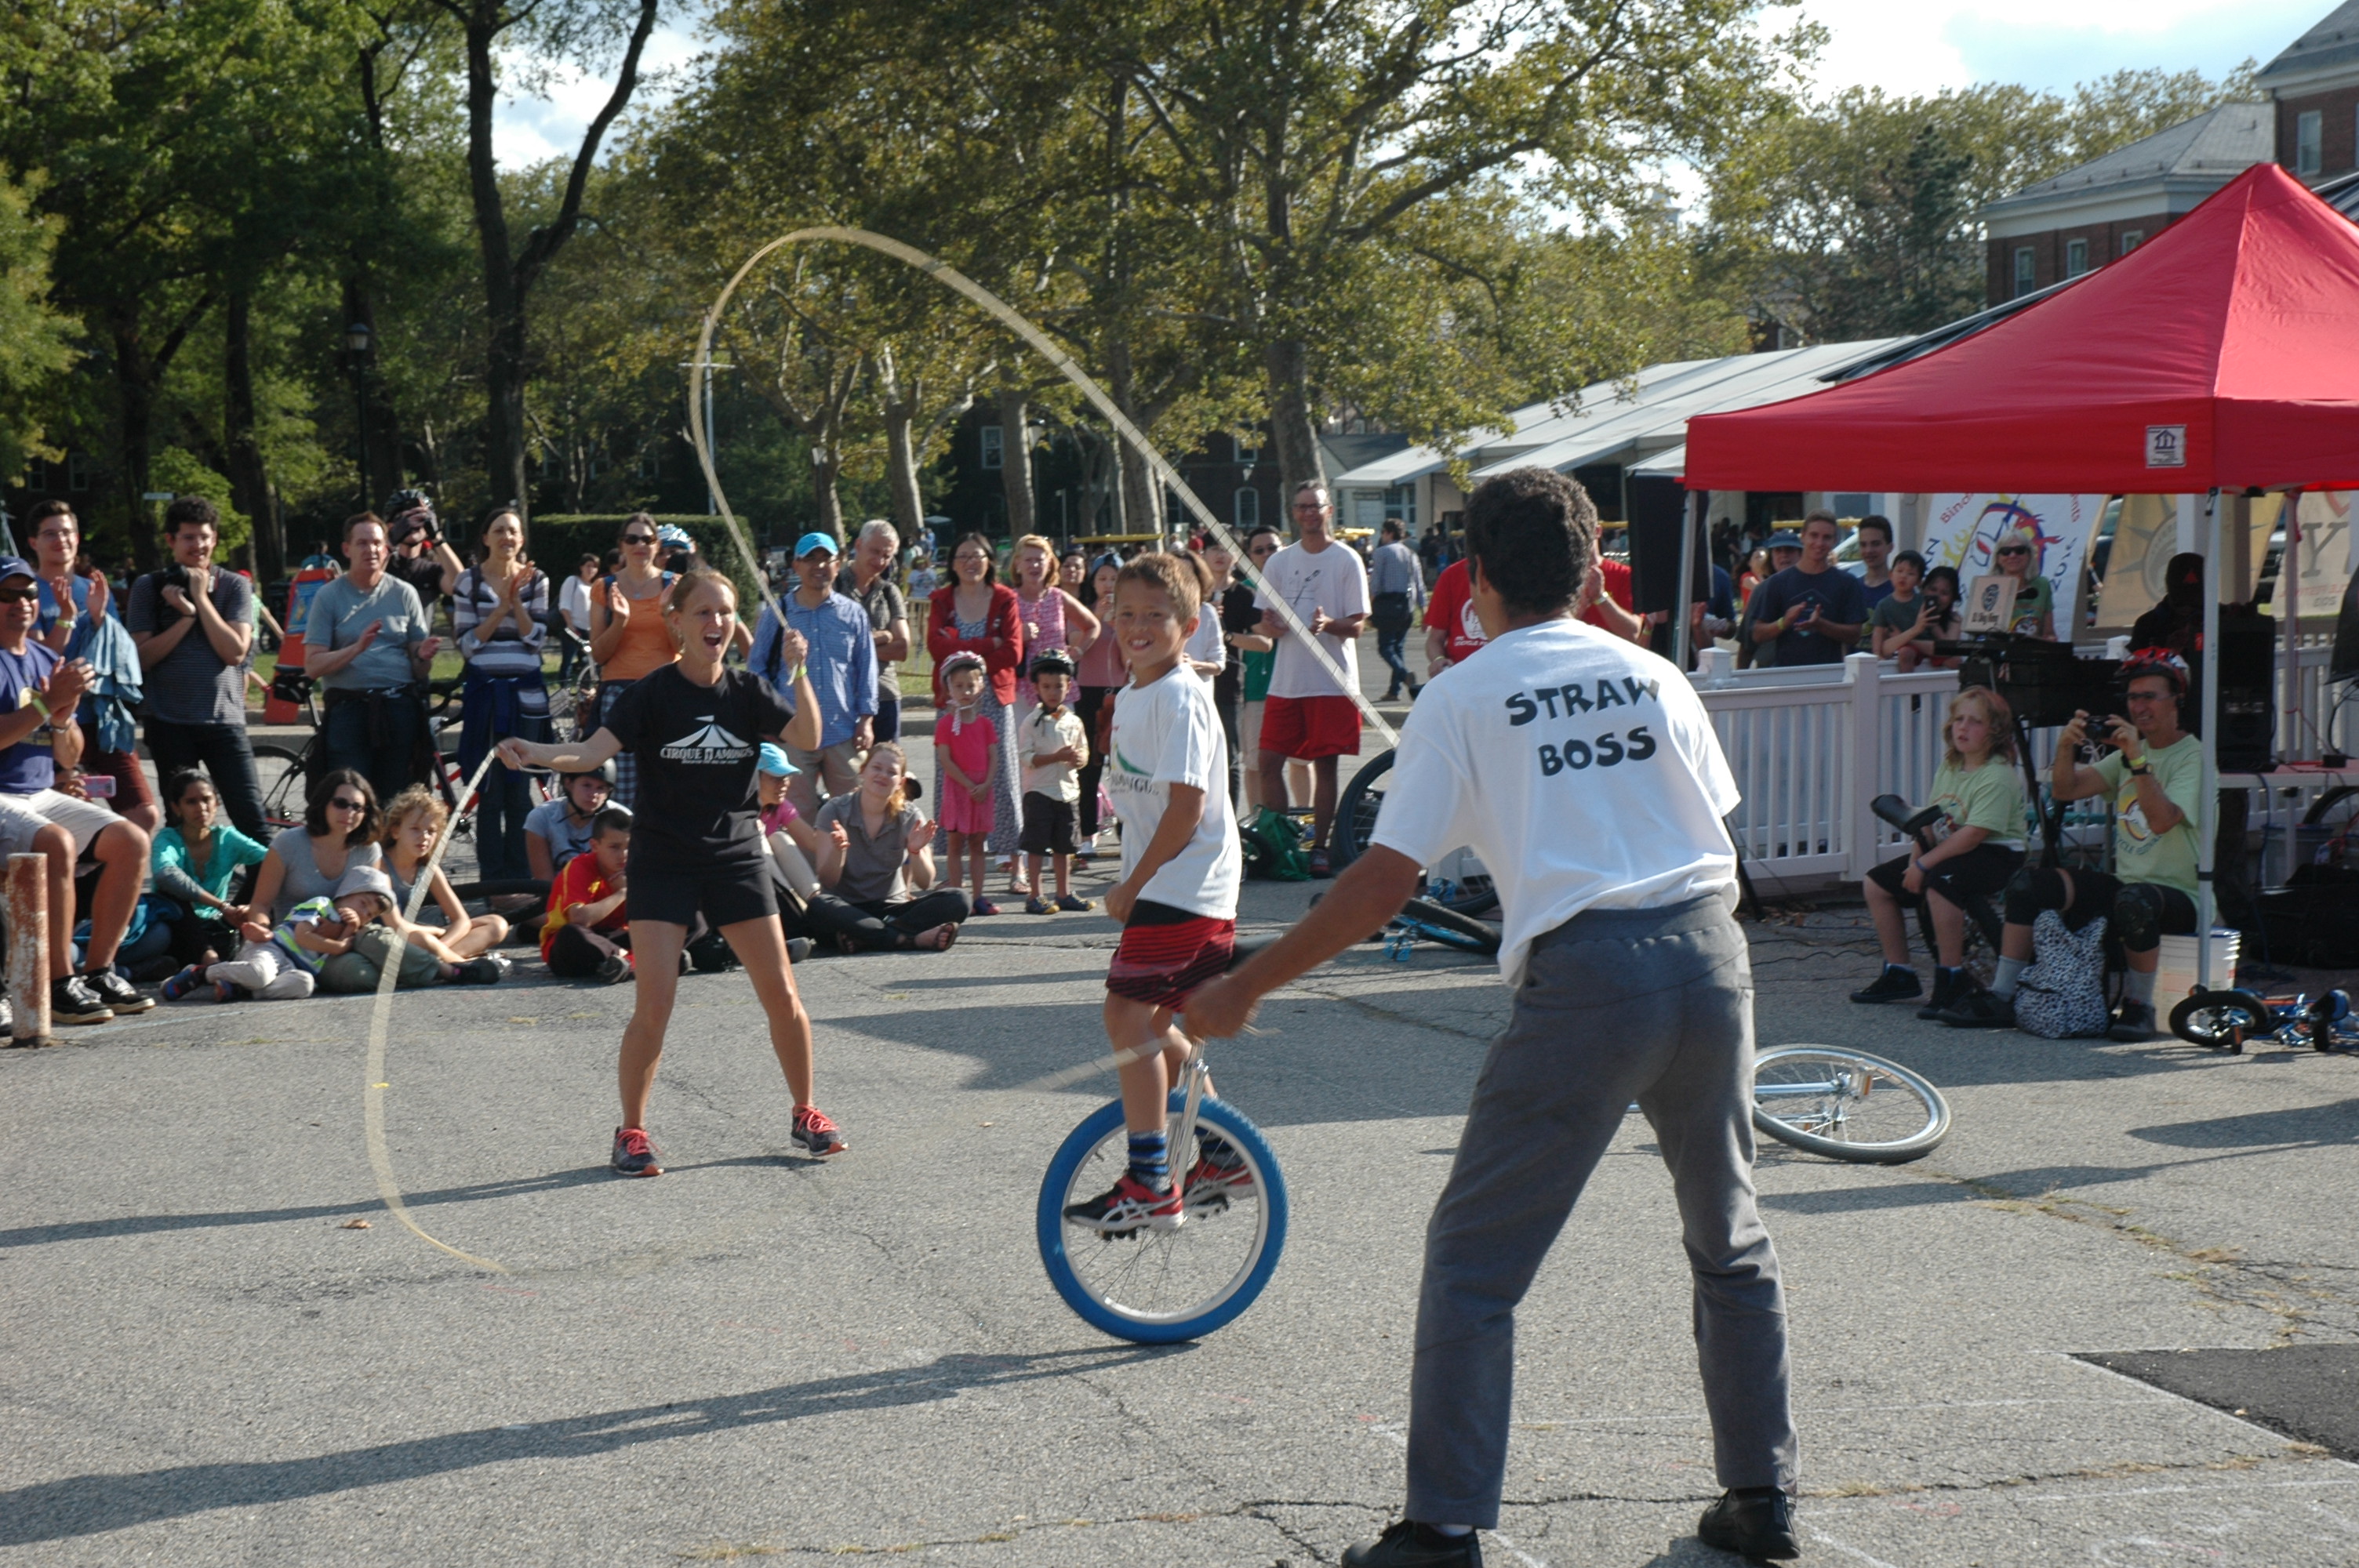 NYC Unicycle Festival 2017 On Governors Island